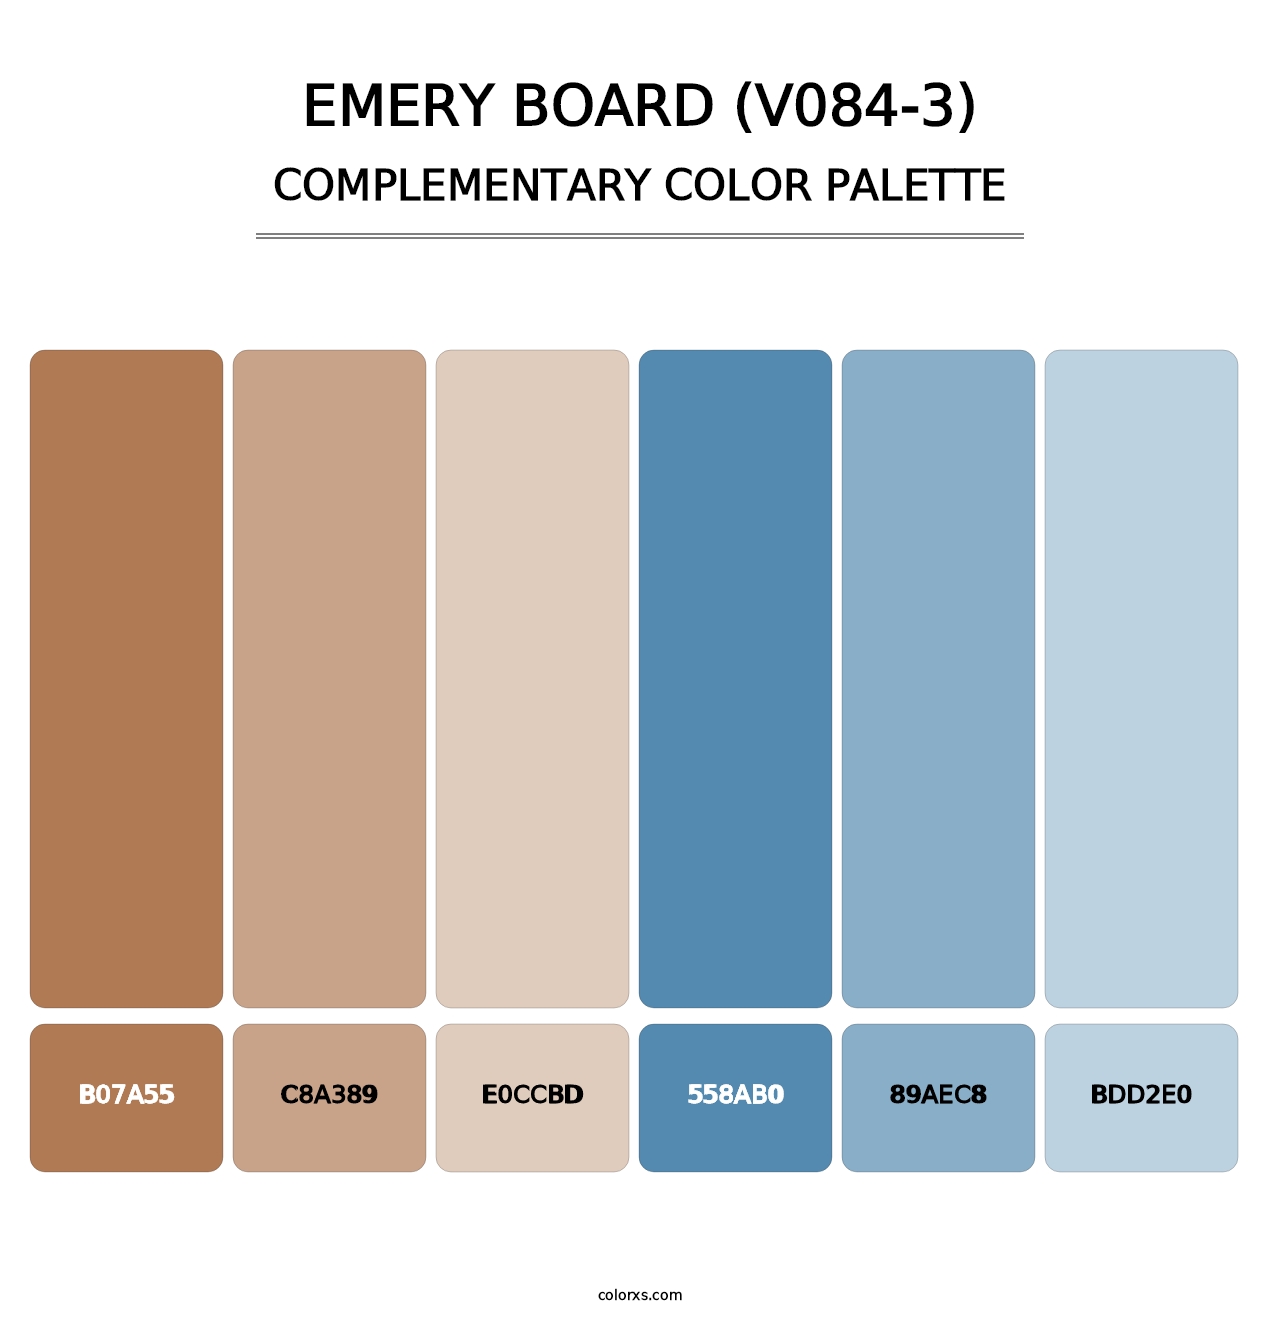 Emery Board (V084-3) - Complementary Color Palette